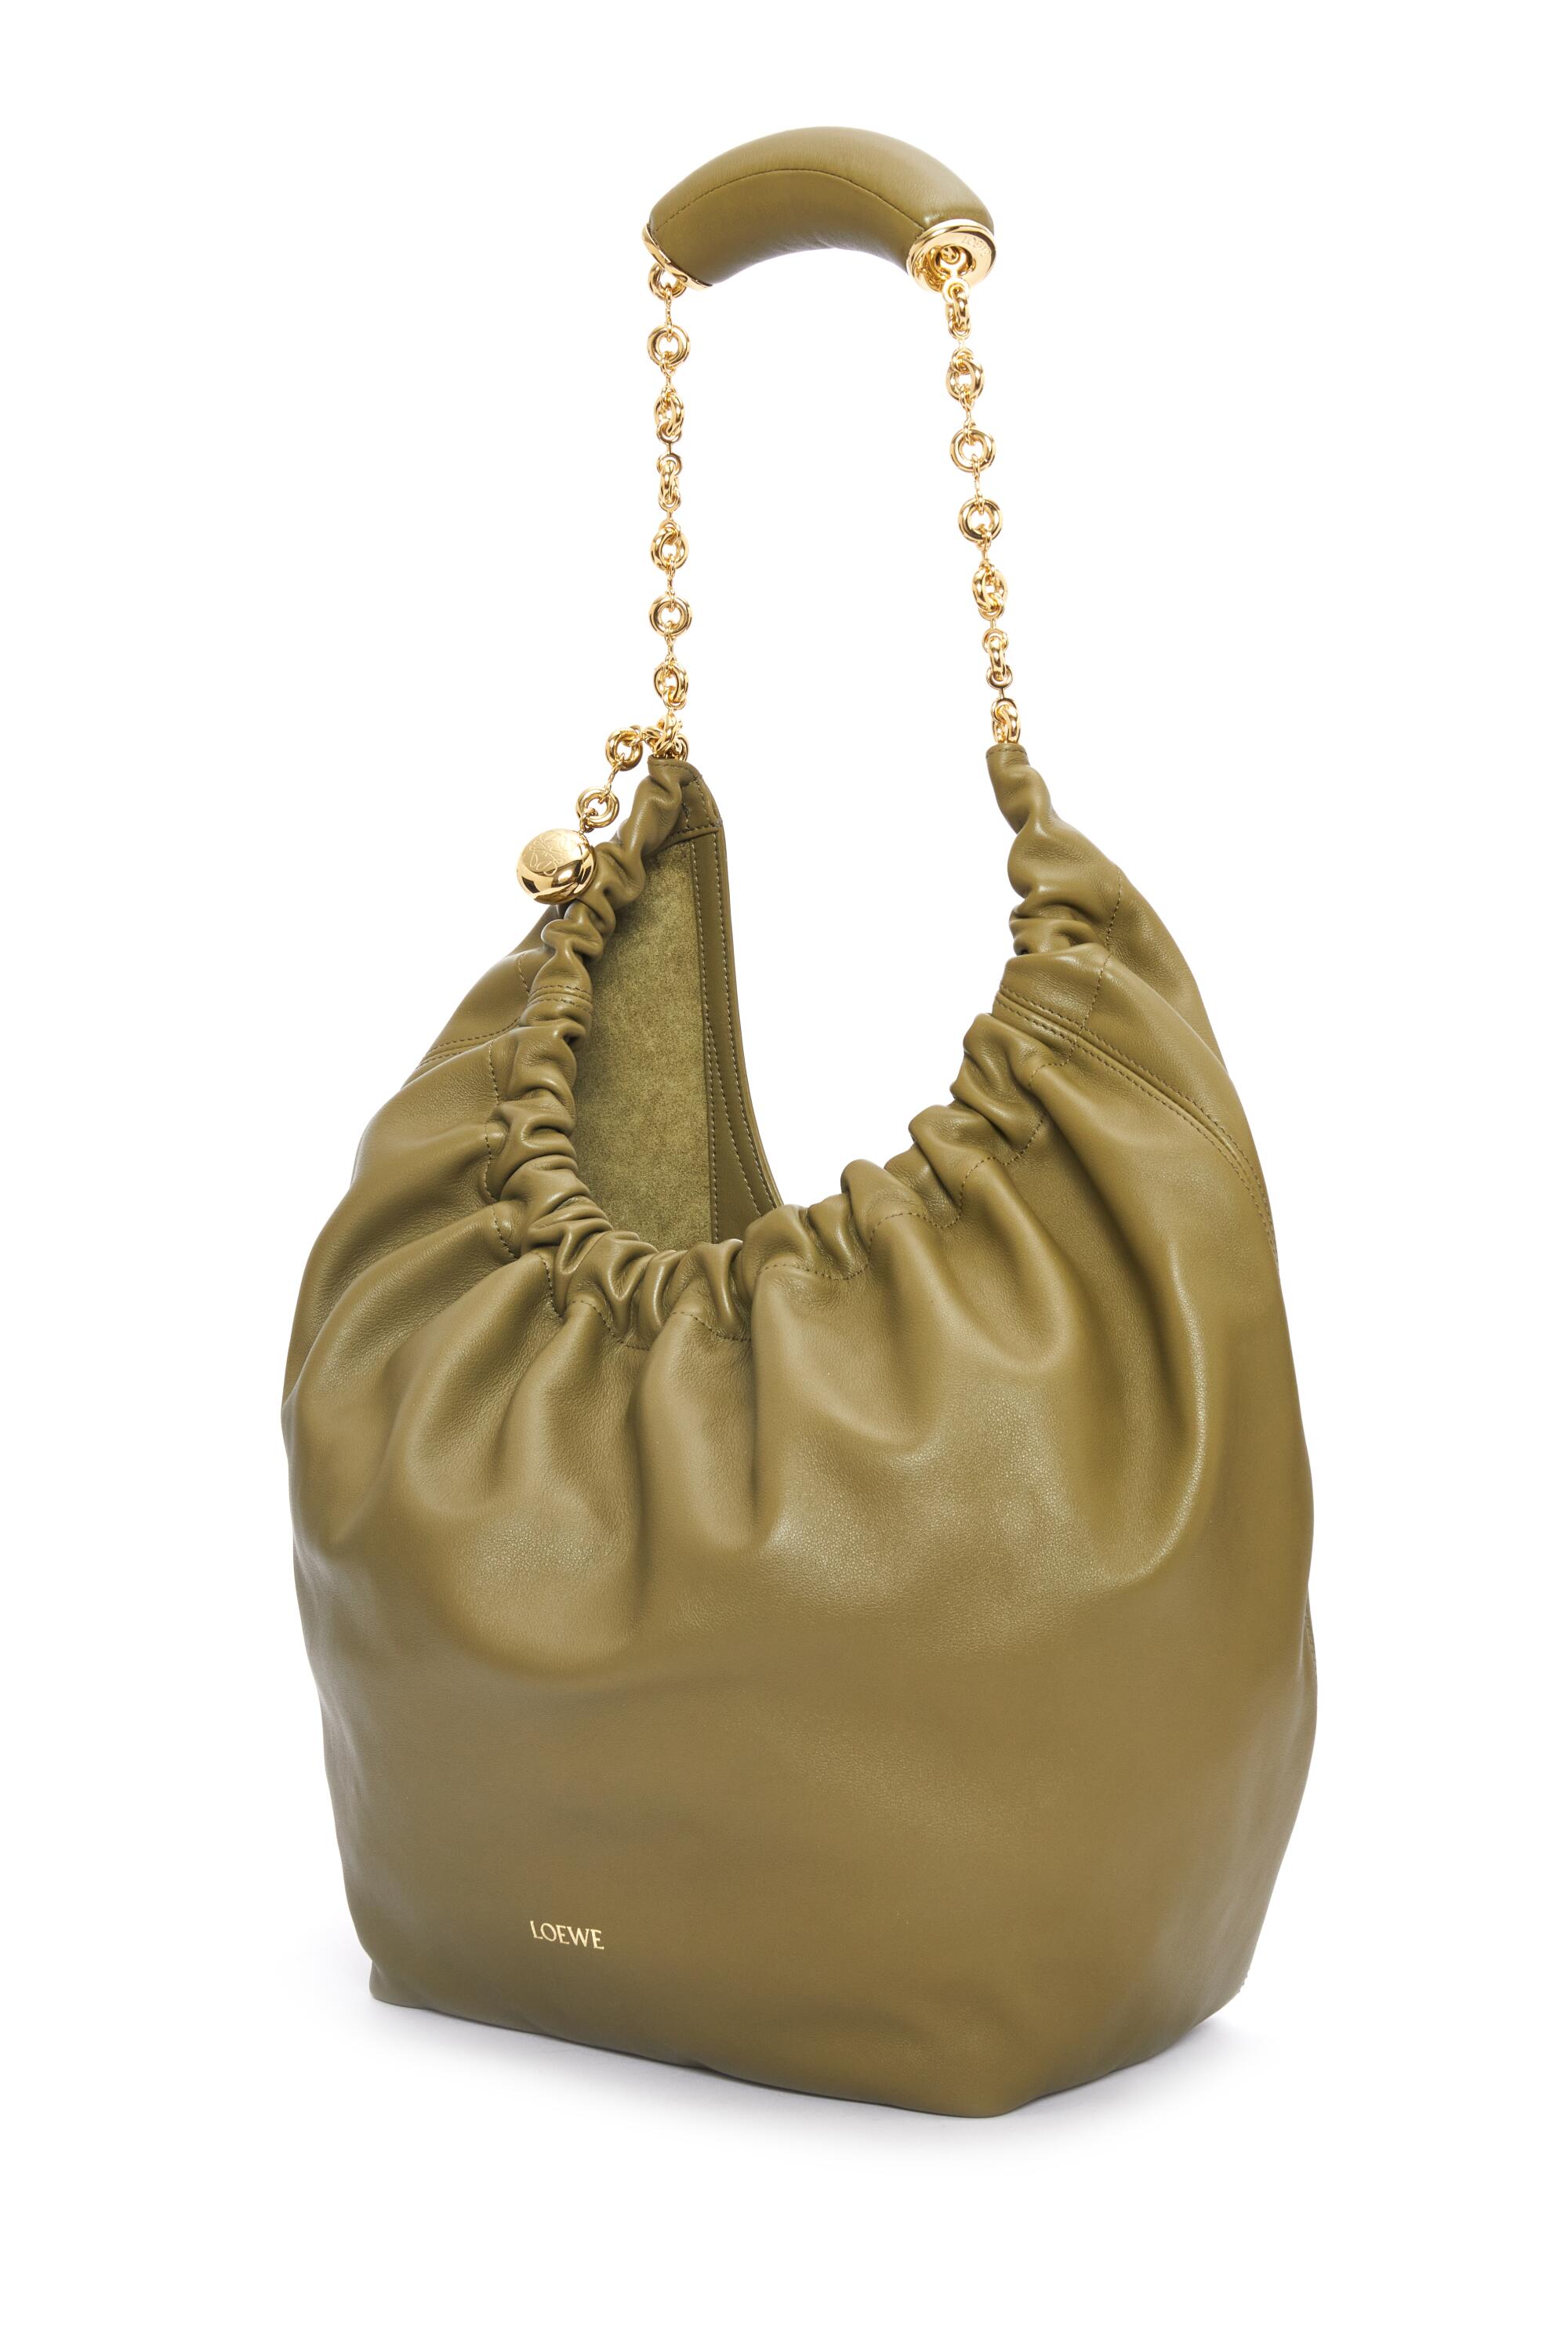 Loewe Squeeze Bag, $3,950 for small, $4,550 for medium Loewe just does ruche right. Offered in four sophisticated colors